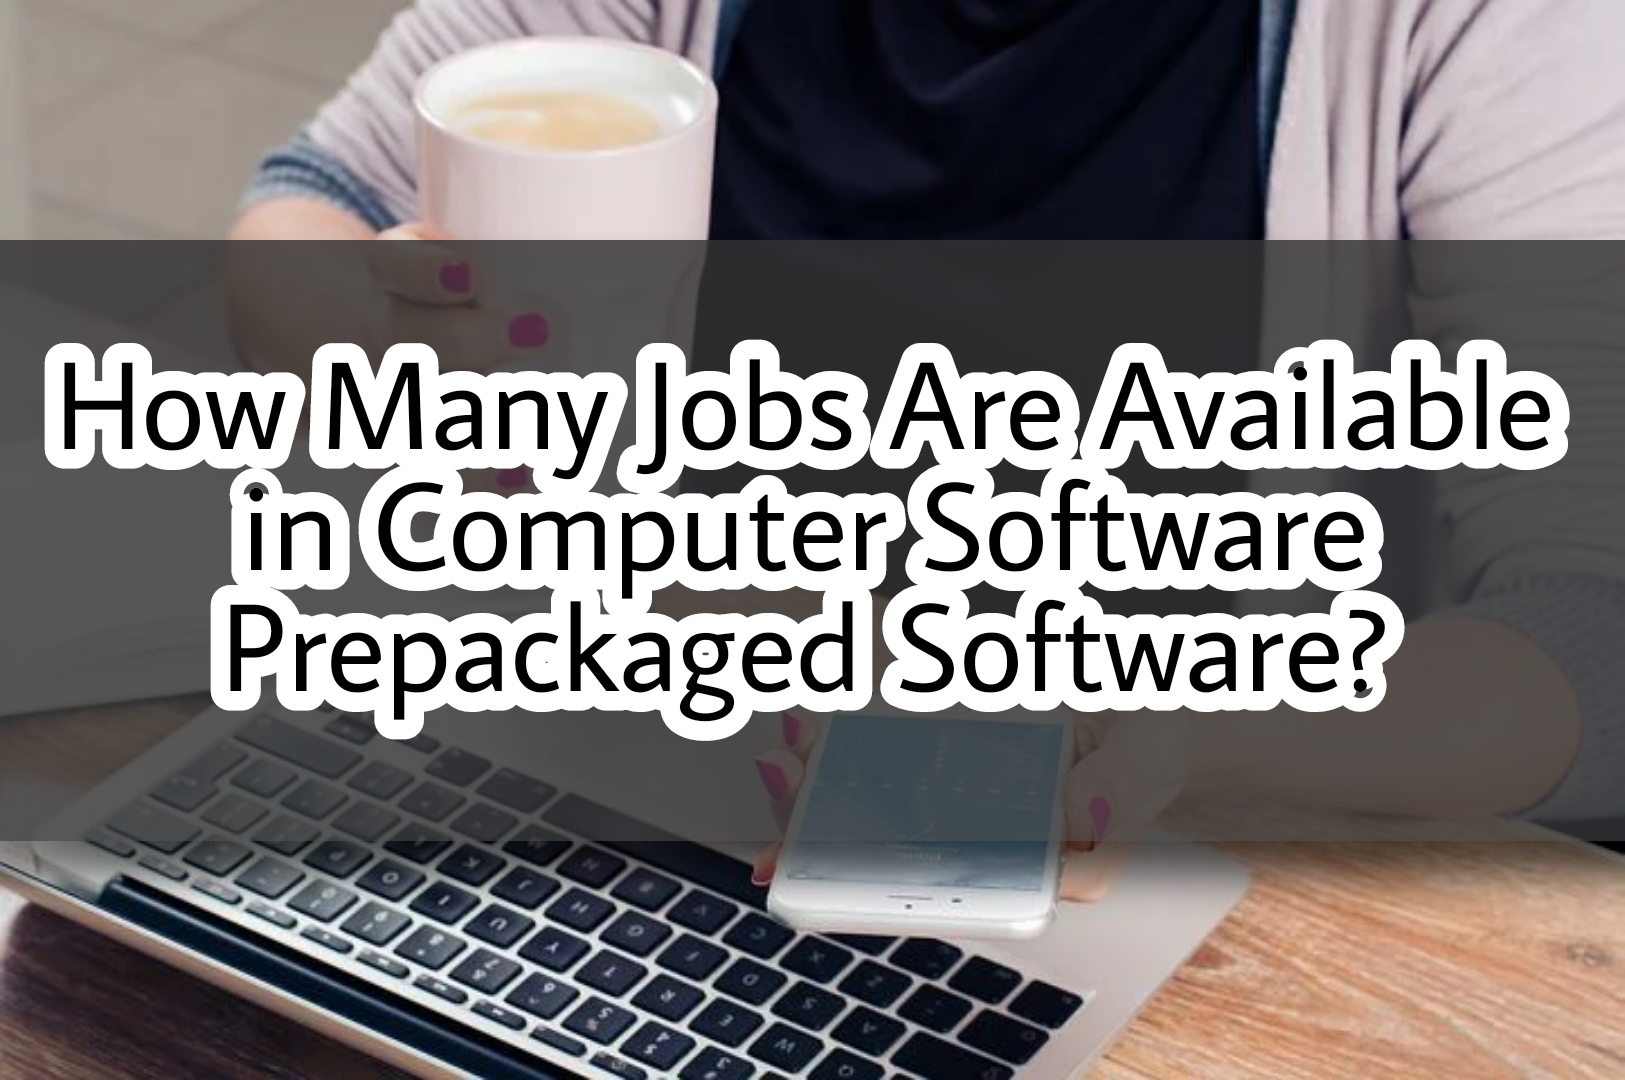 How Many Jobs Are Available in Computer Software